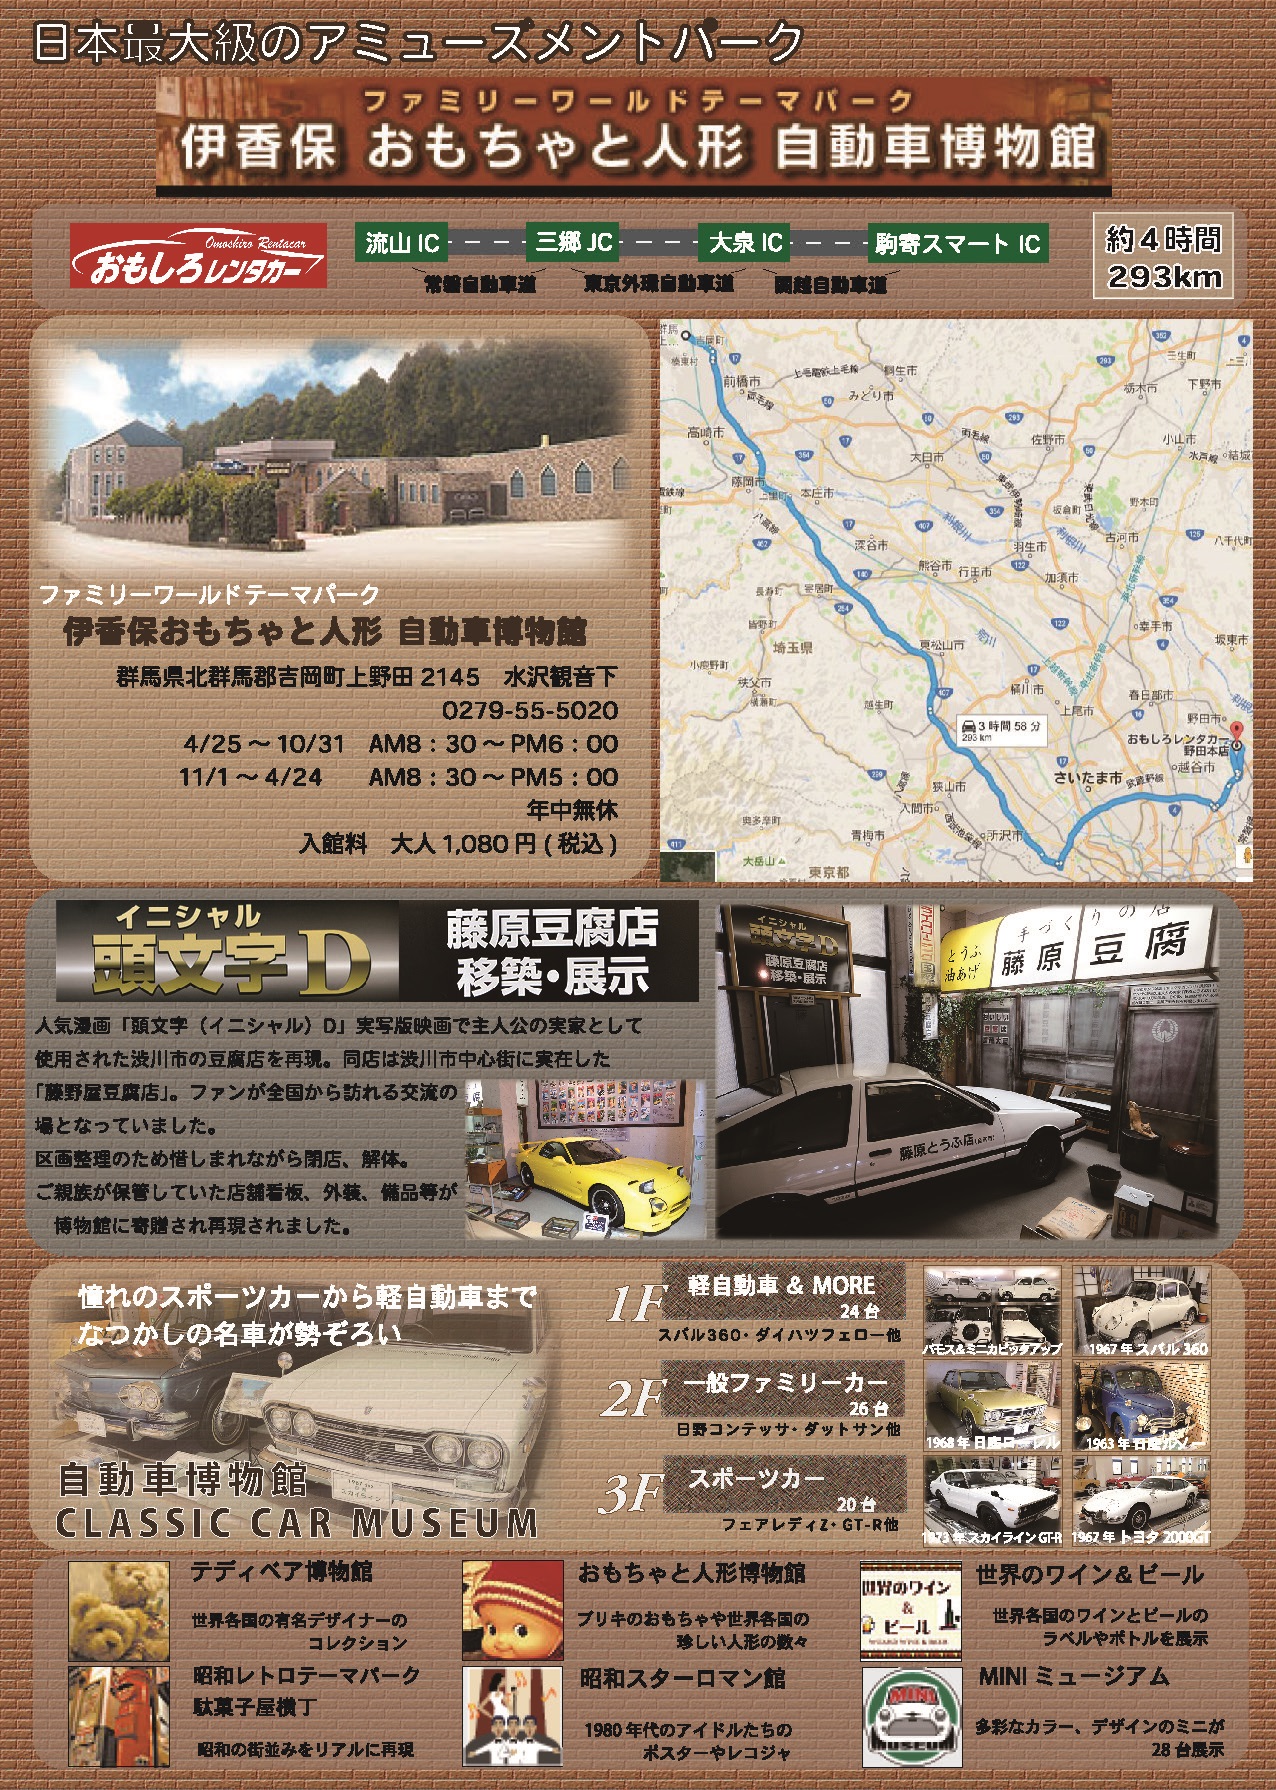 Ikaho Toy and Doll Car Museum 9 Hours Drive Course